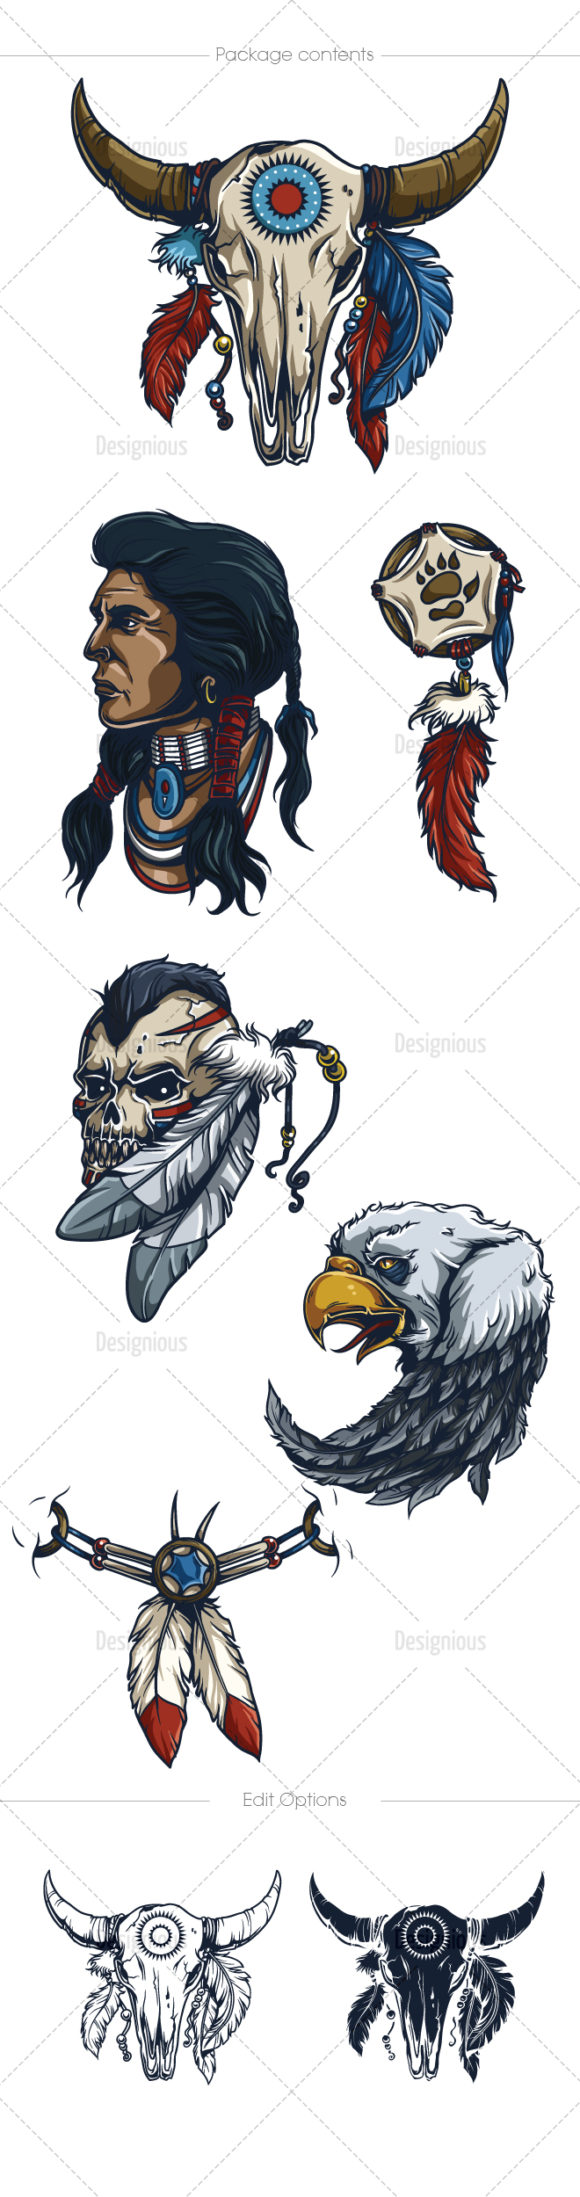 Native American Vector Pack 1 2